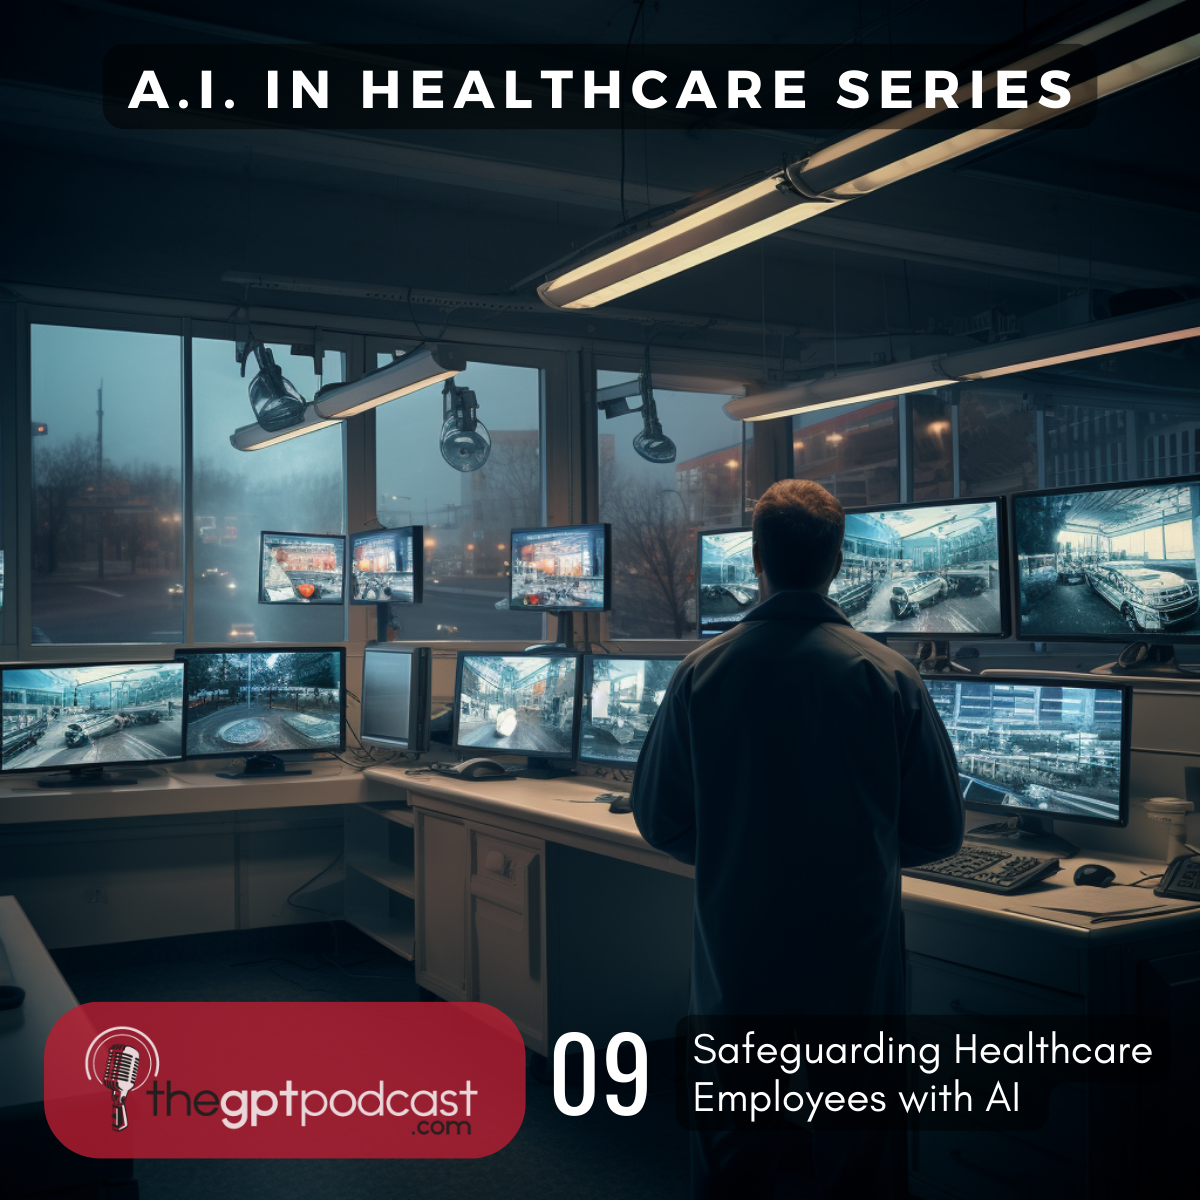 Safeguarding Healthcare Employees with AI